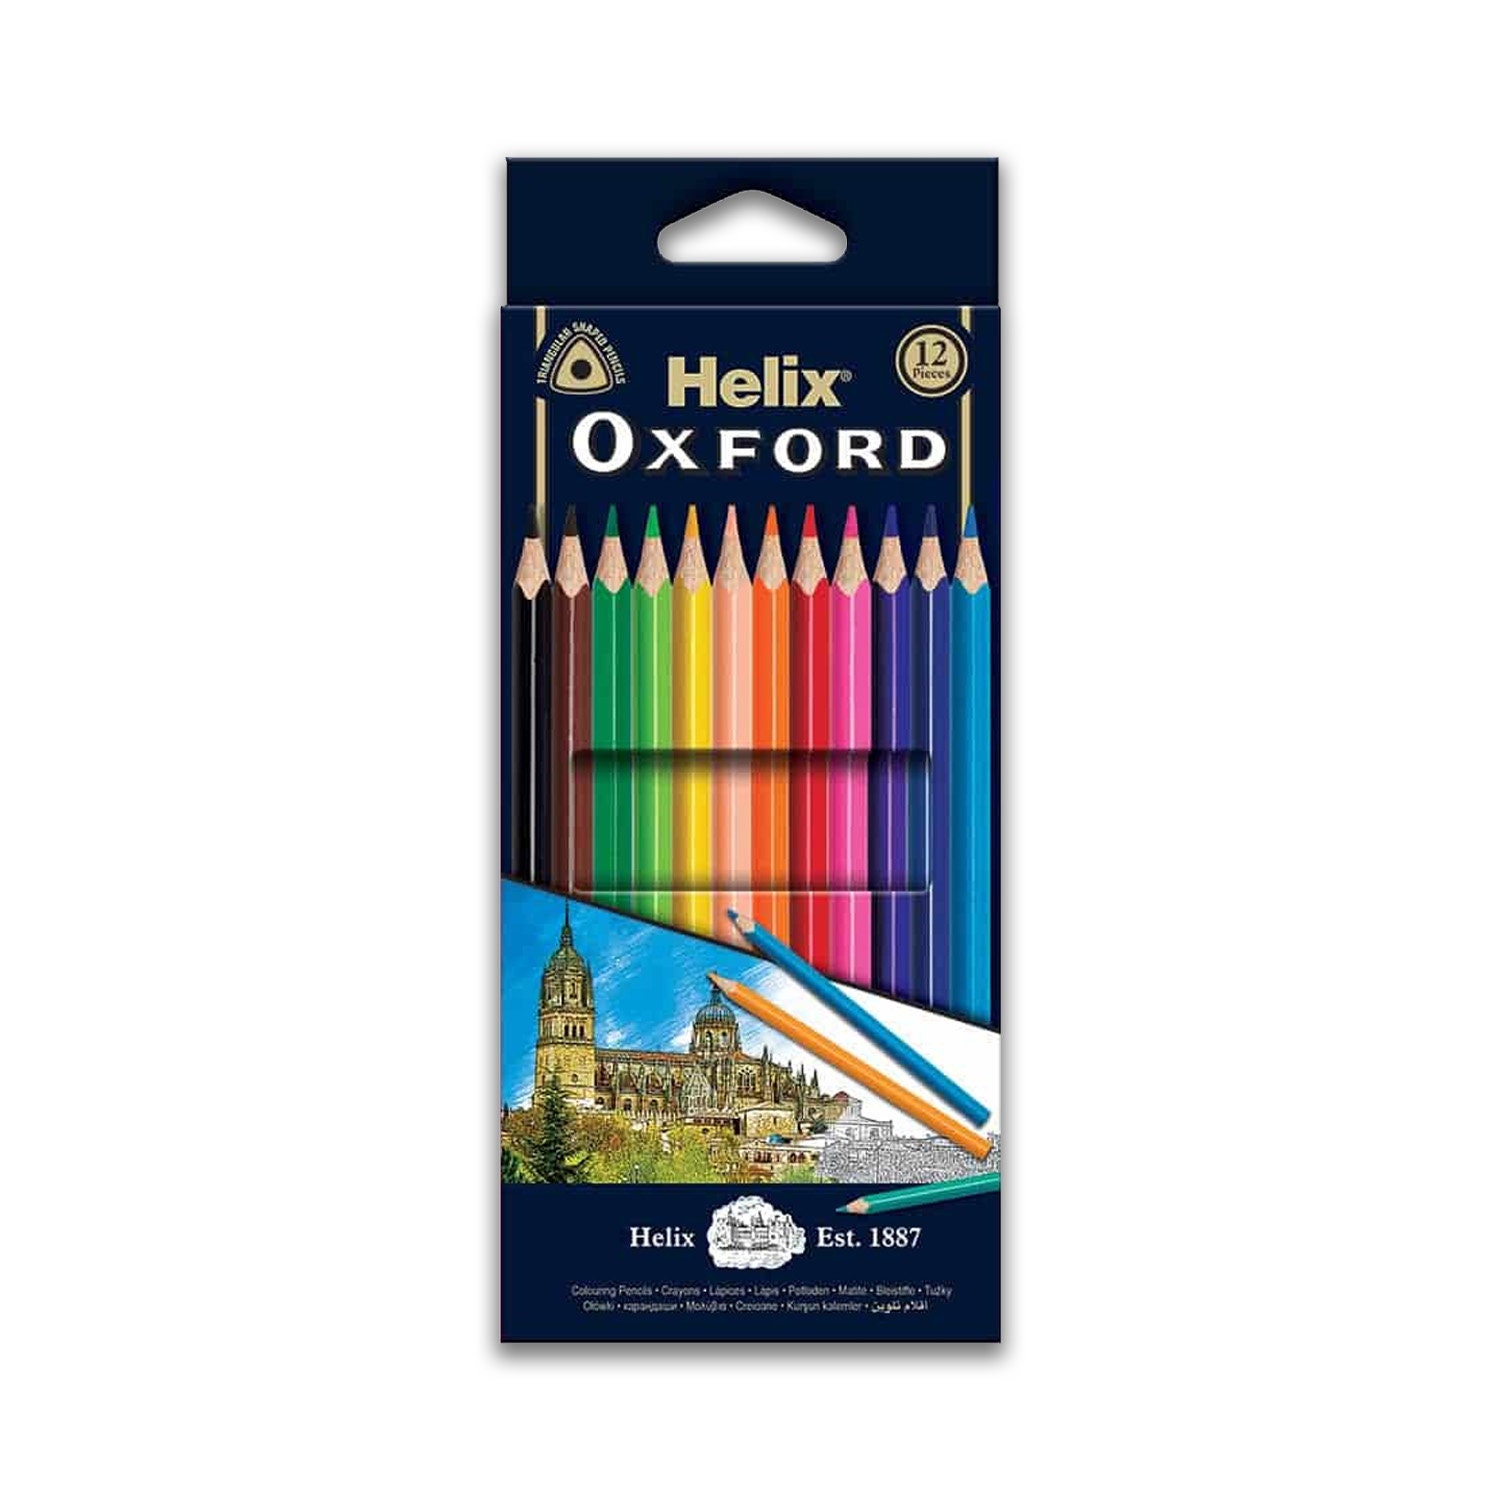 Promo Deluxe Adult Coloring Book and 8 Color Pencil Sets (12 Sheets), Toys  and Fun